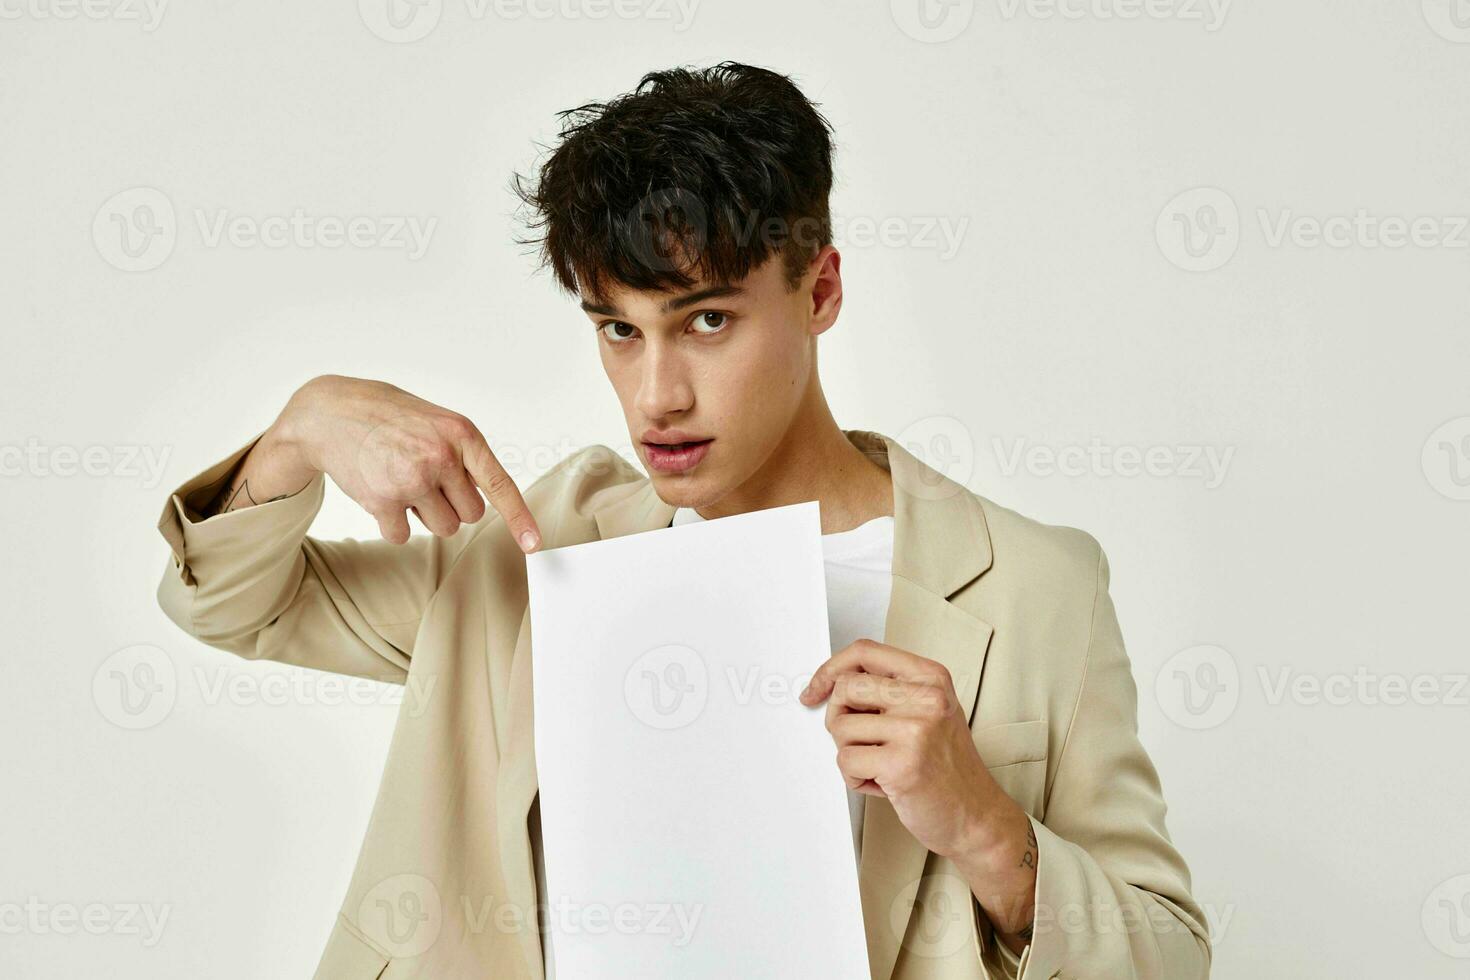 handsome guy posing with a notepad in a suit light background unaltered photo